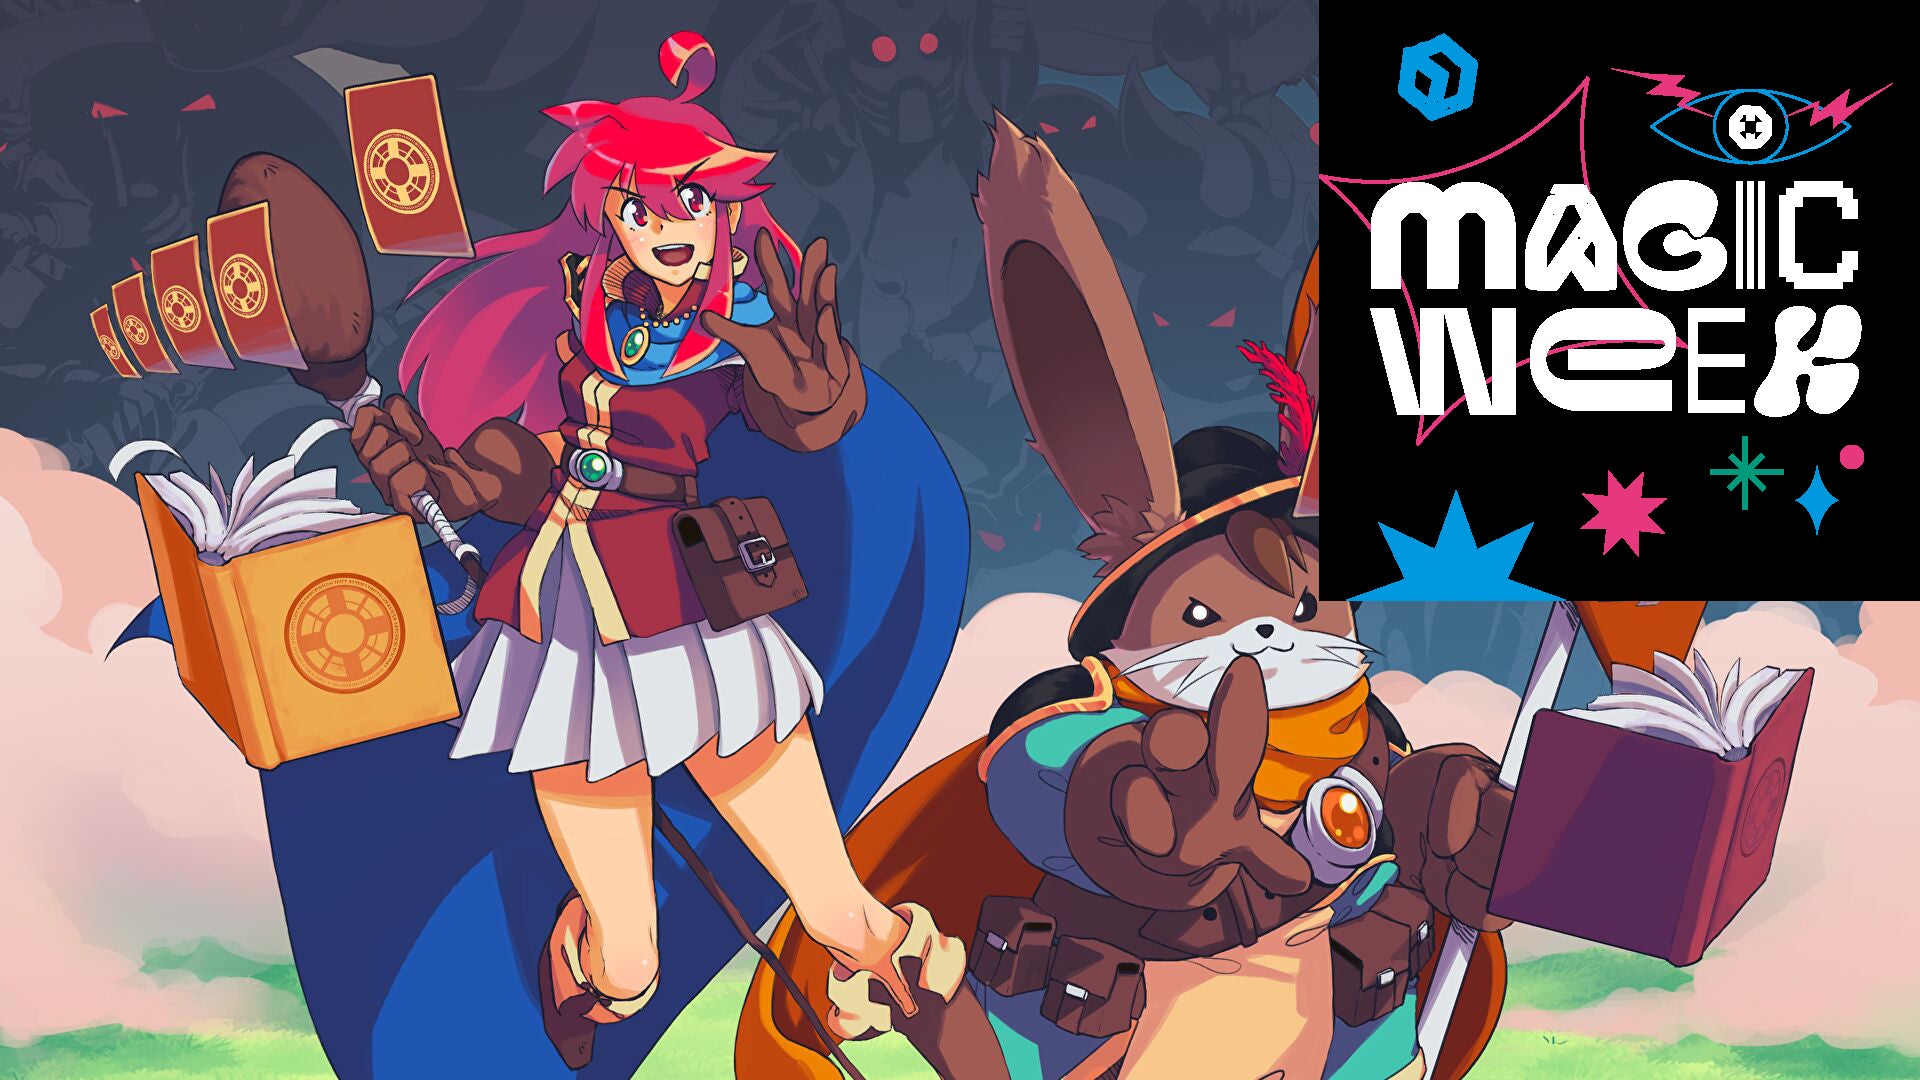 A 2D drawing of a young woman with a blue cloak and pink hair, standing alongside a large brown anthropomorphic wizard, both wield magic spellbooks full of cards in a screenshot from Dungeon Drafters. A Black square logo reading MAGIC WEEK is over the top right corner